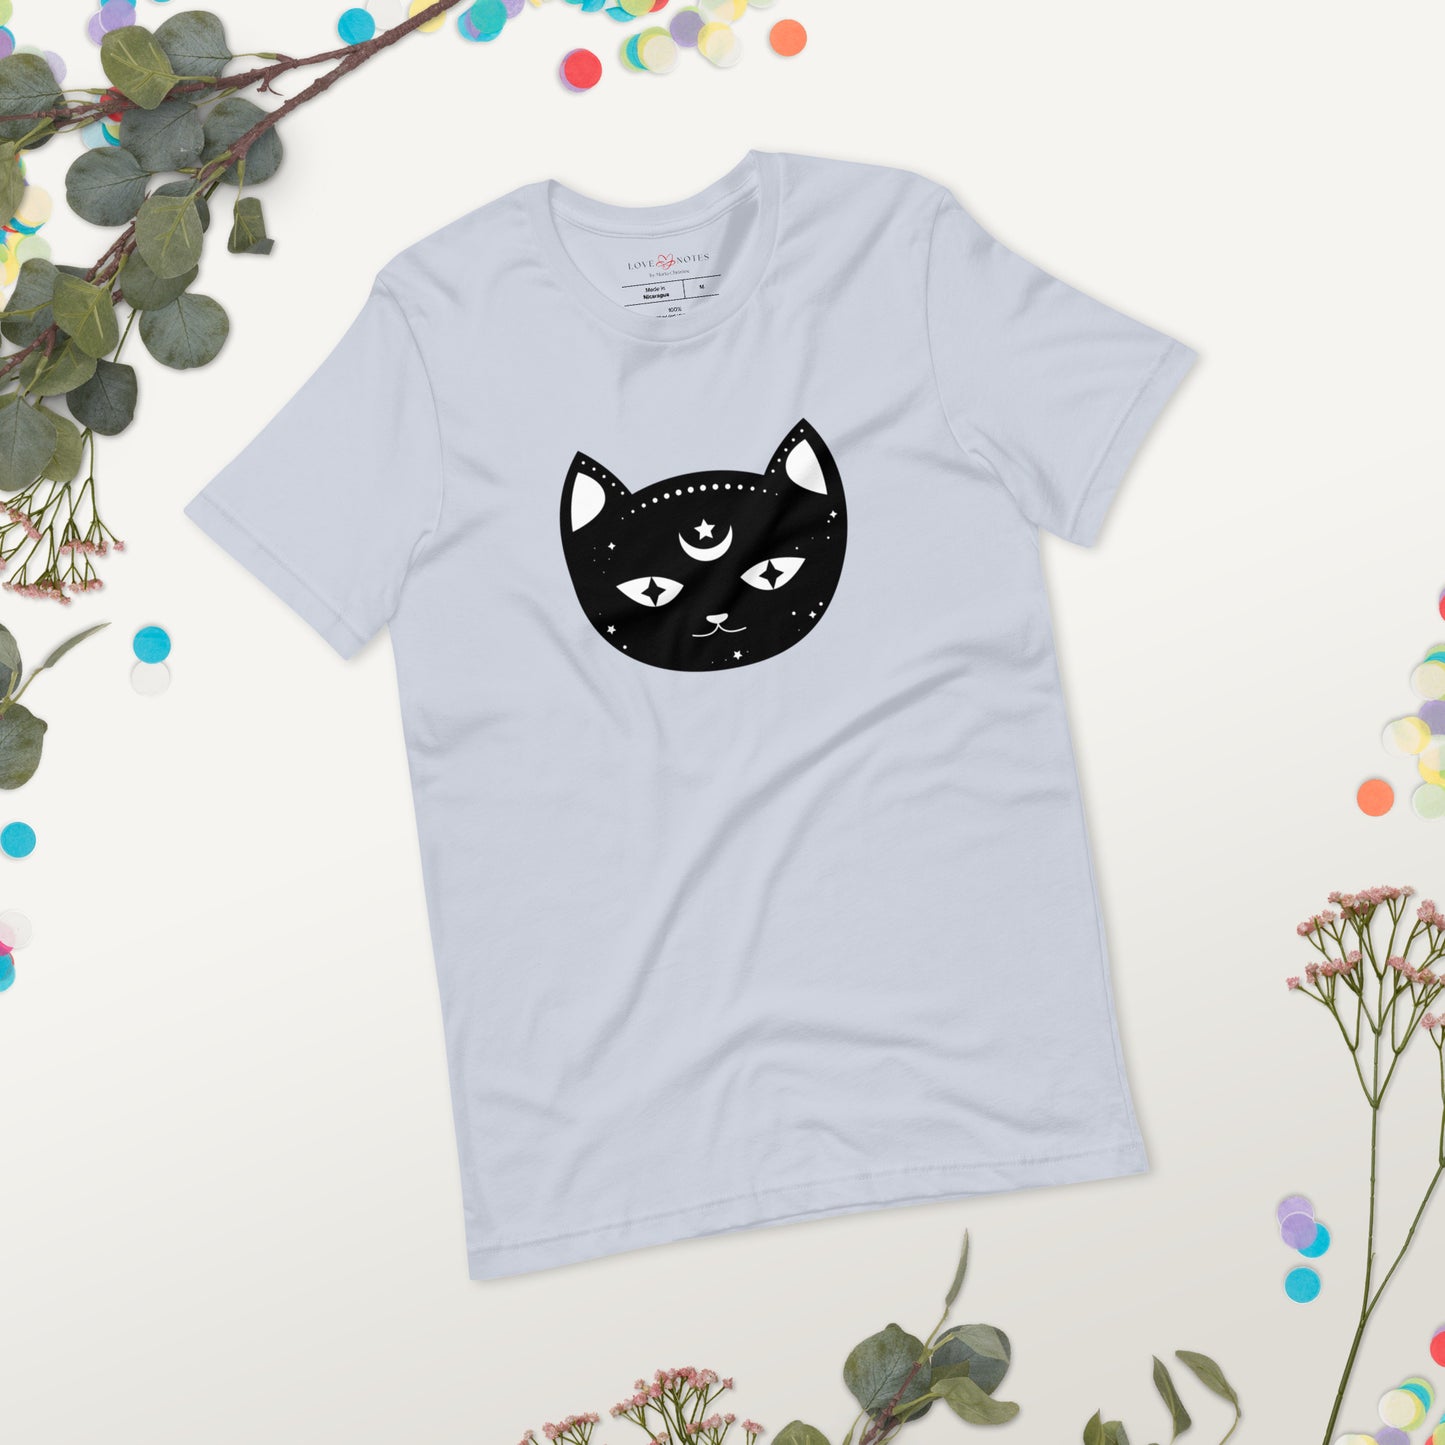 Unisex Tee: Black Cat Face with Crescent Moon and Star